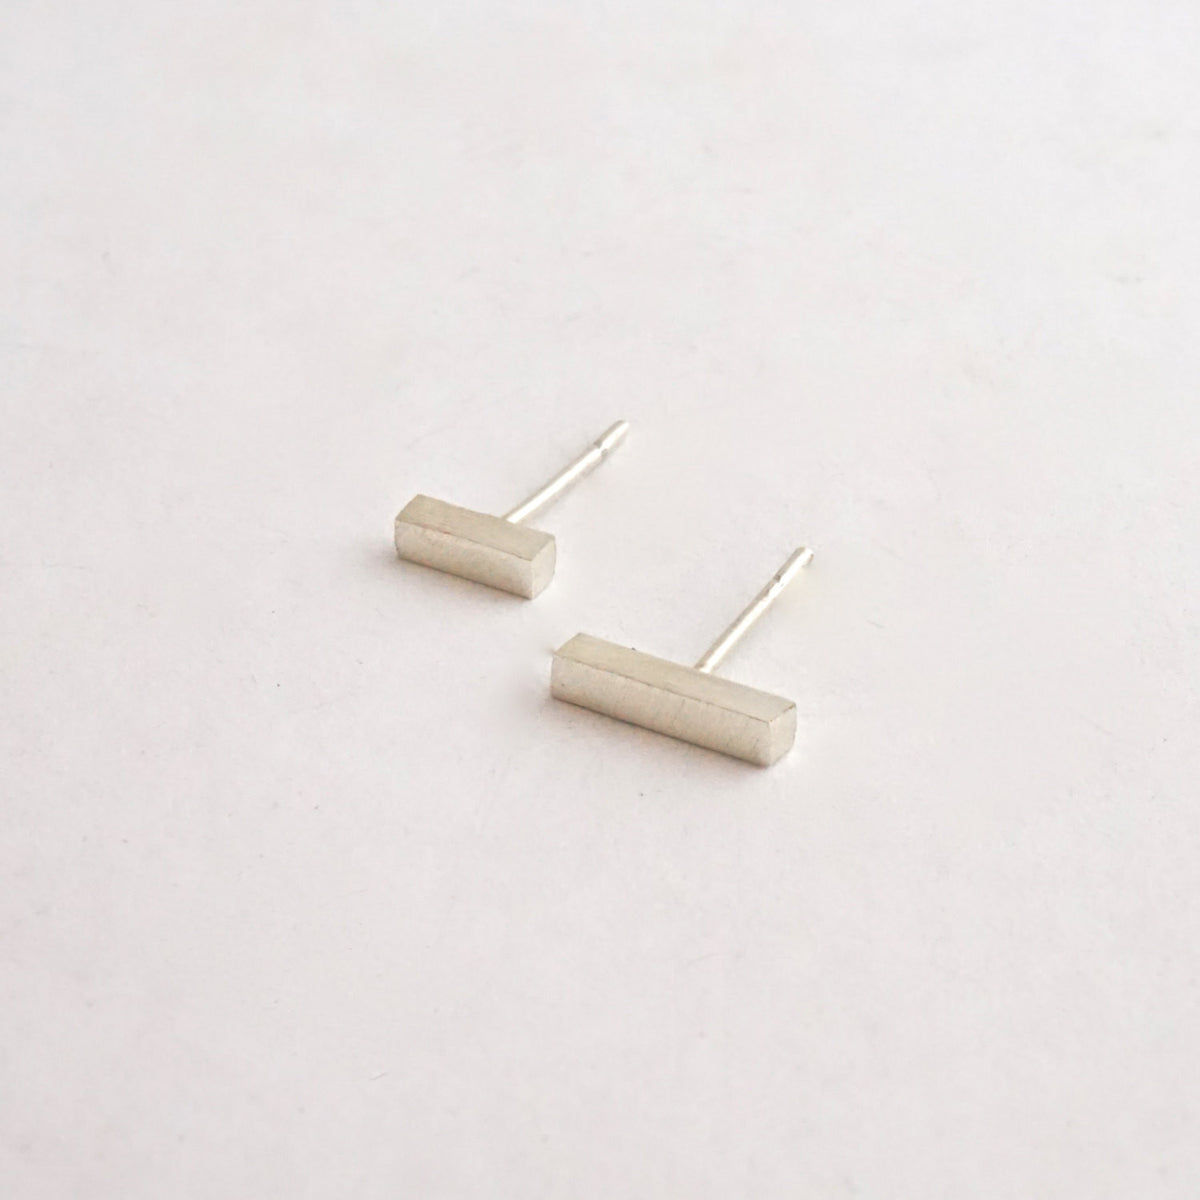 Distinctive Affordable Hand-Made Thick Bar Stud Earring Set One Pair 3/8" And One Pair 1/4" - 0166 - Virginia Wynne Designs